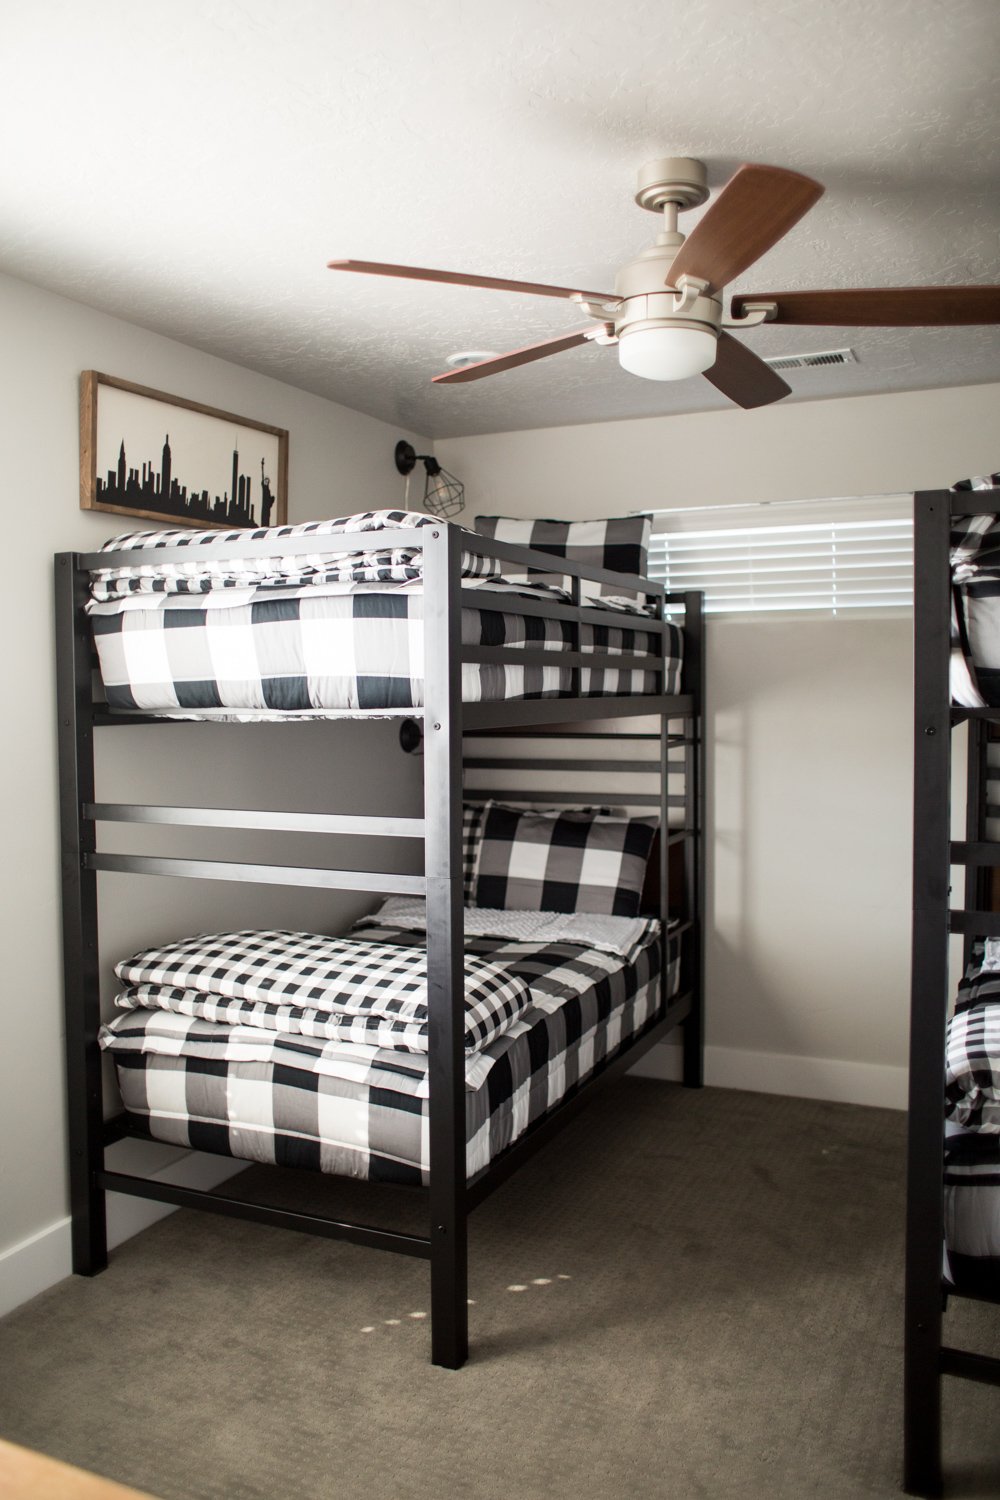 How To Make A Bunkbed In Less Than 5, How To Make A Bunk Bed Look Nice